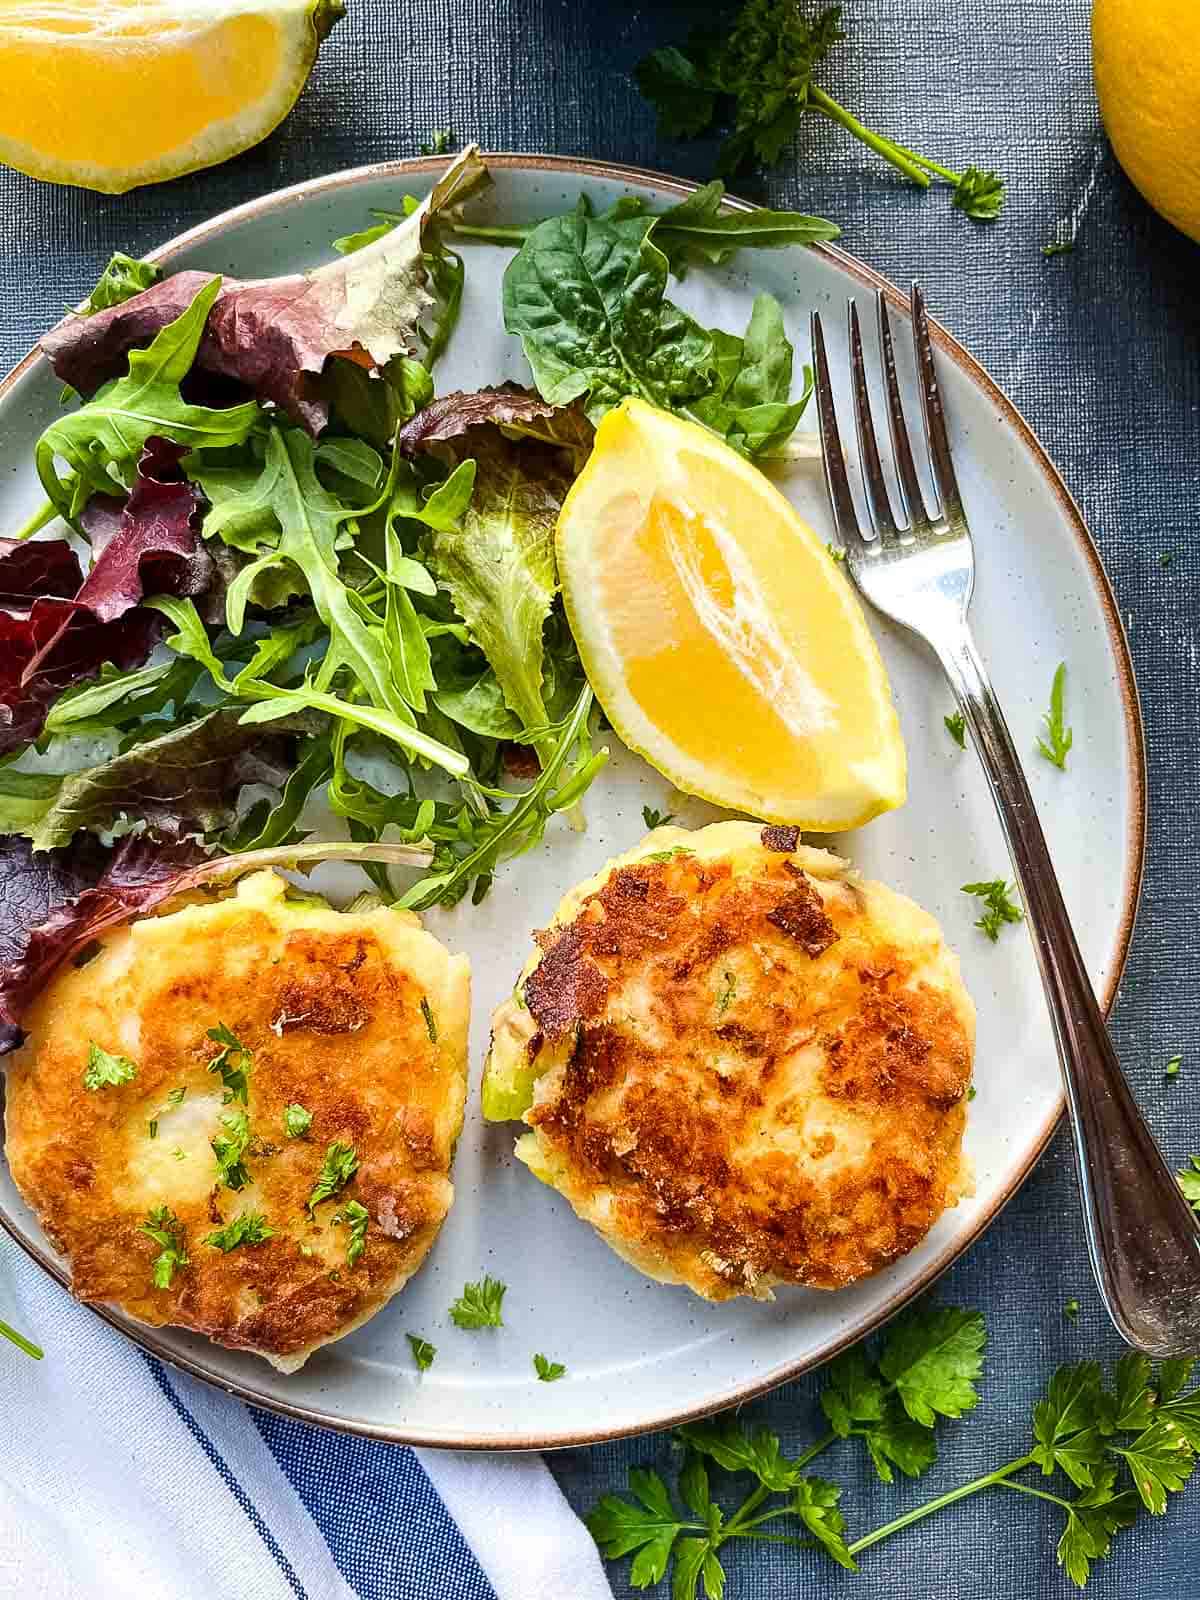 two smoked haddock fishcakes served with salad on a plate